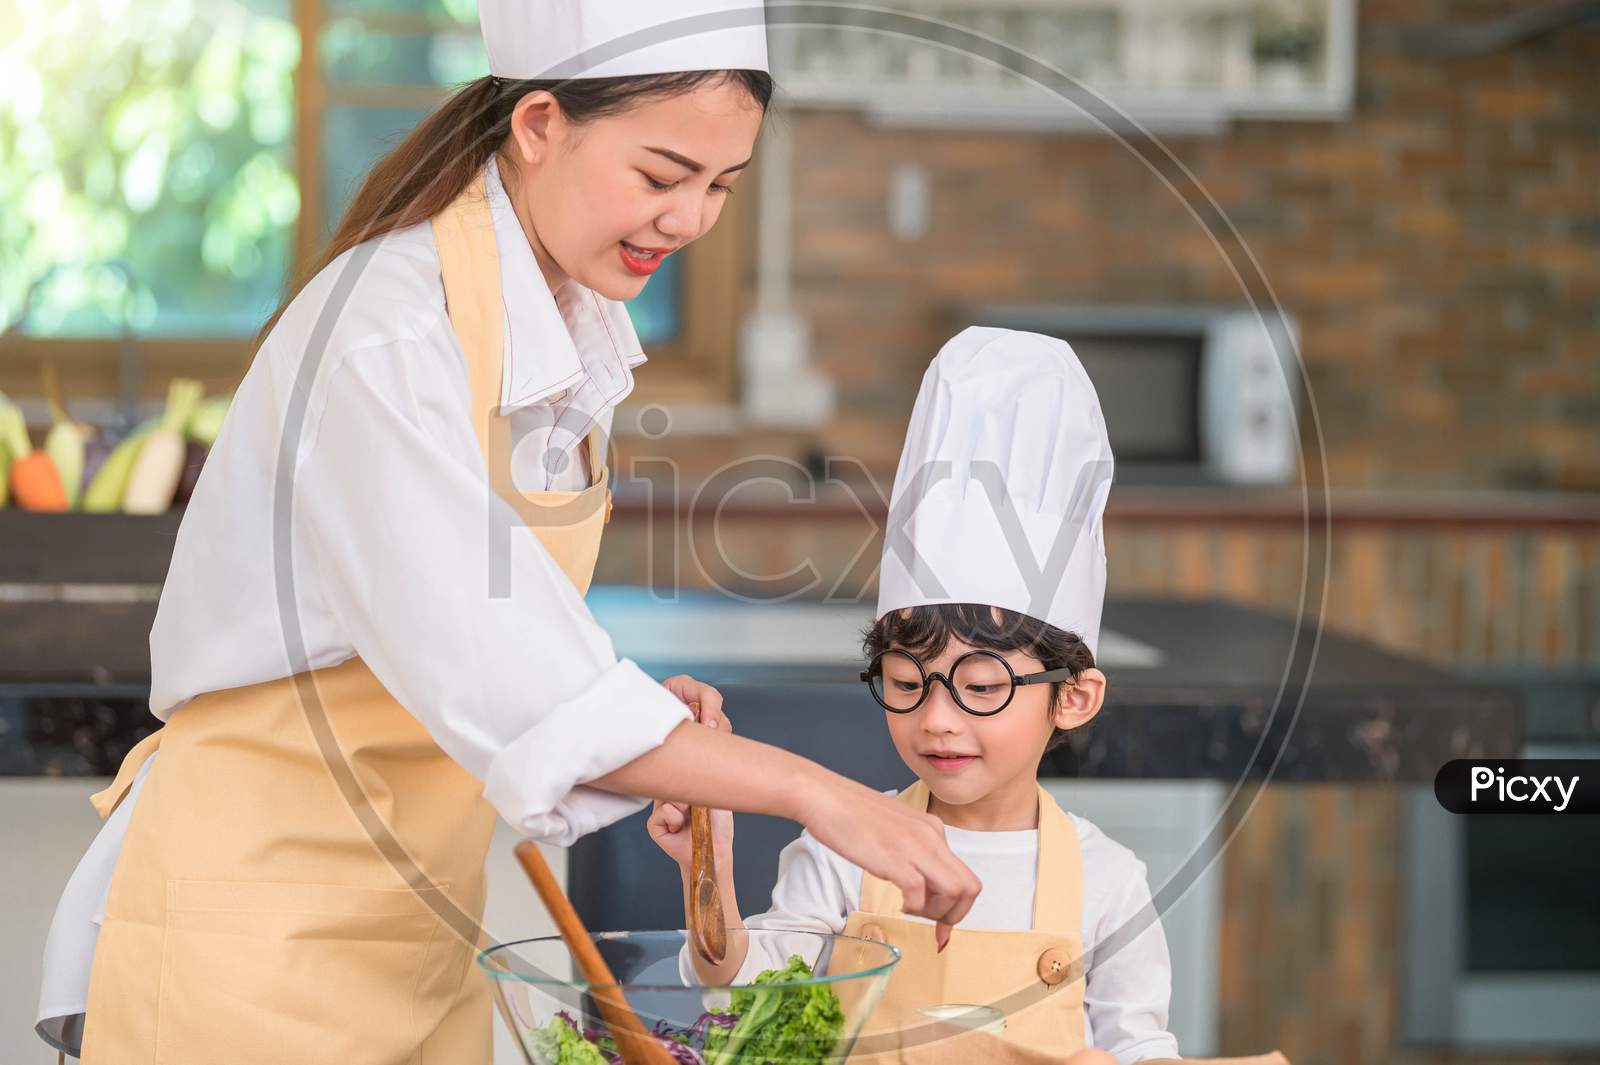 Happy Beautiful Asian Woman And Cute Little Boy With Eyeglasses Prepare To Cooking In Kitchen At Home. People Lifestyles And Family. Homemade Food And Ingredients Concept. Two Thai People Life